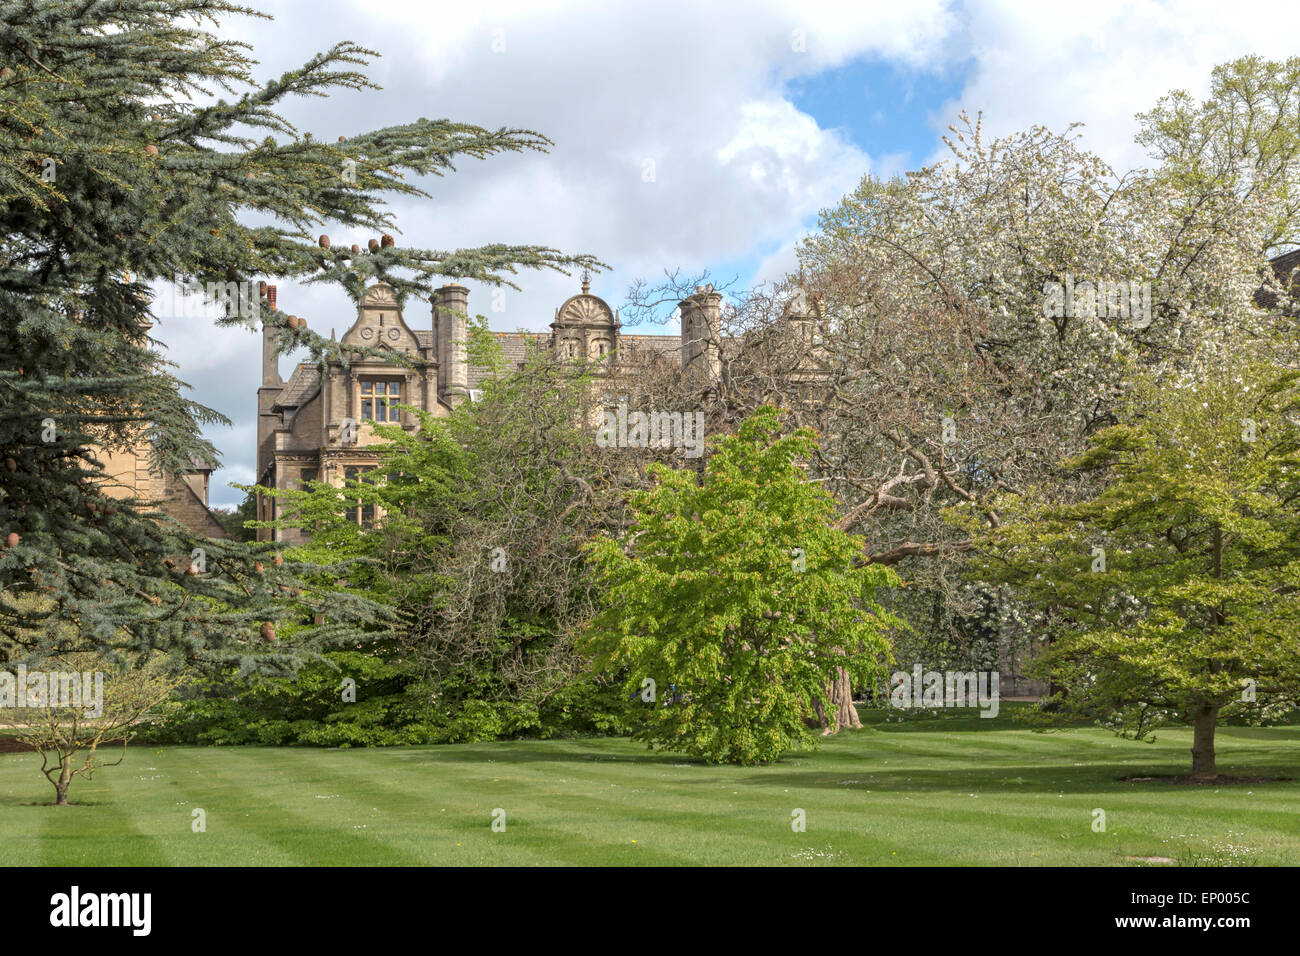 View from Broad Street on Trinity College Garden in the University City of Oxford, Oxfordshire, England, United Kingdom. Stock Photo